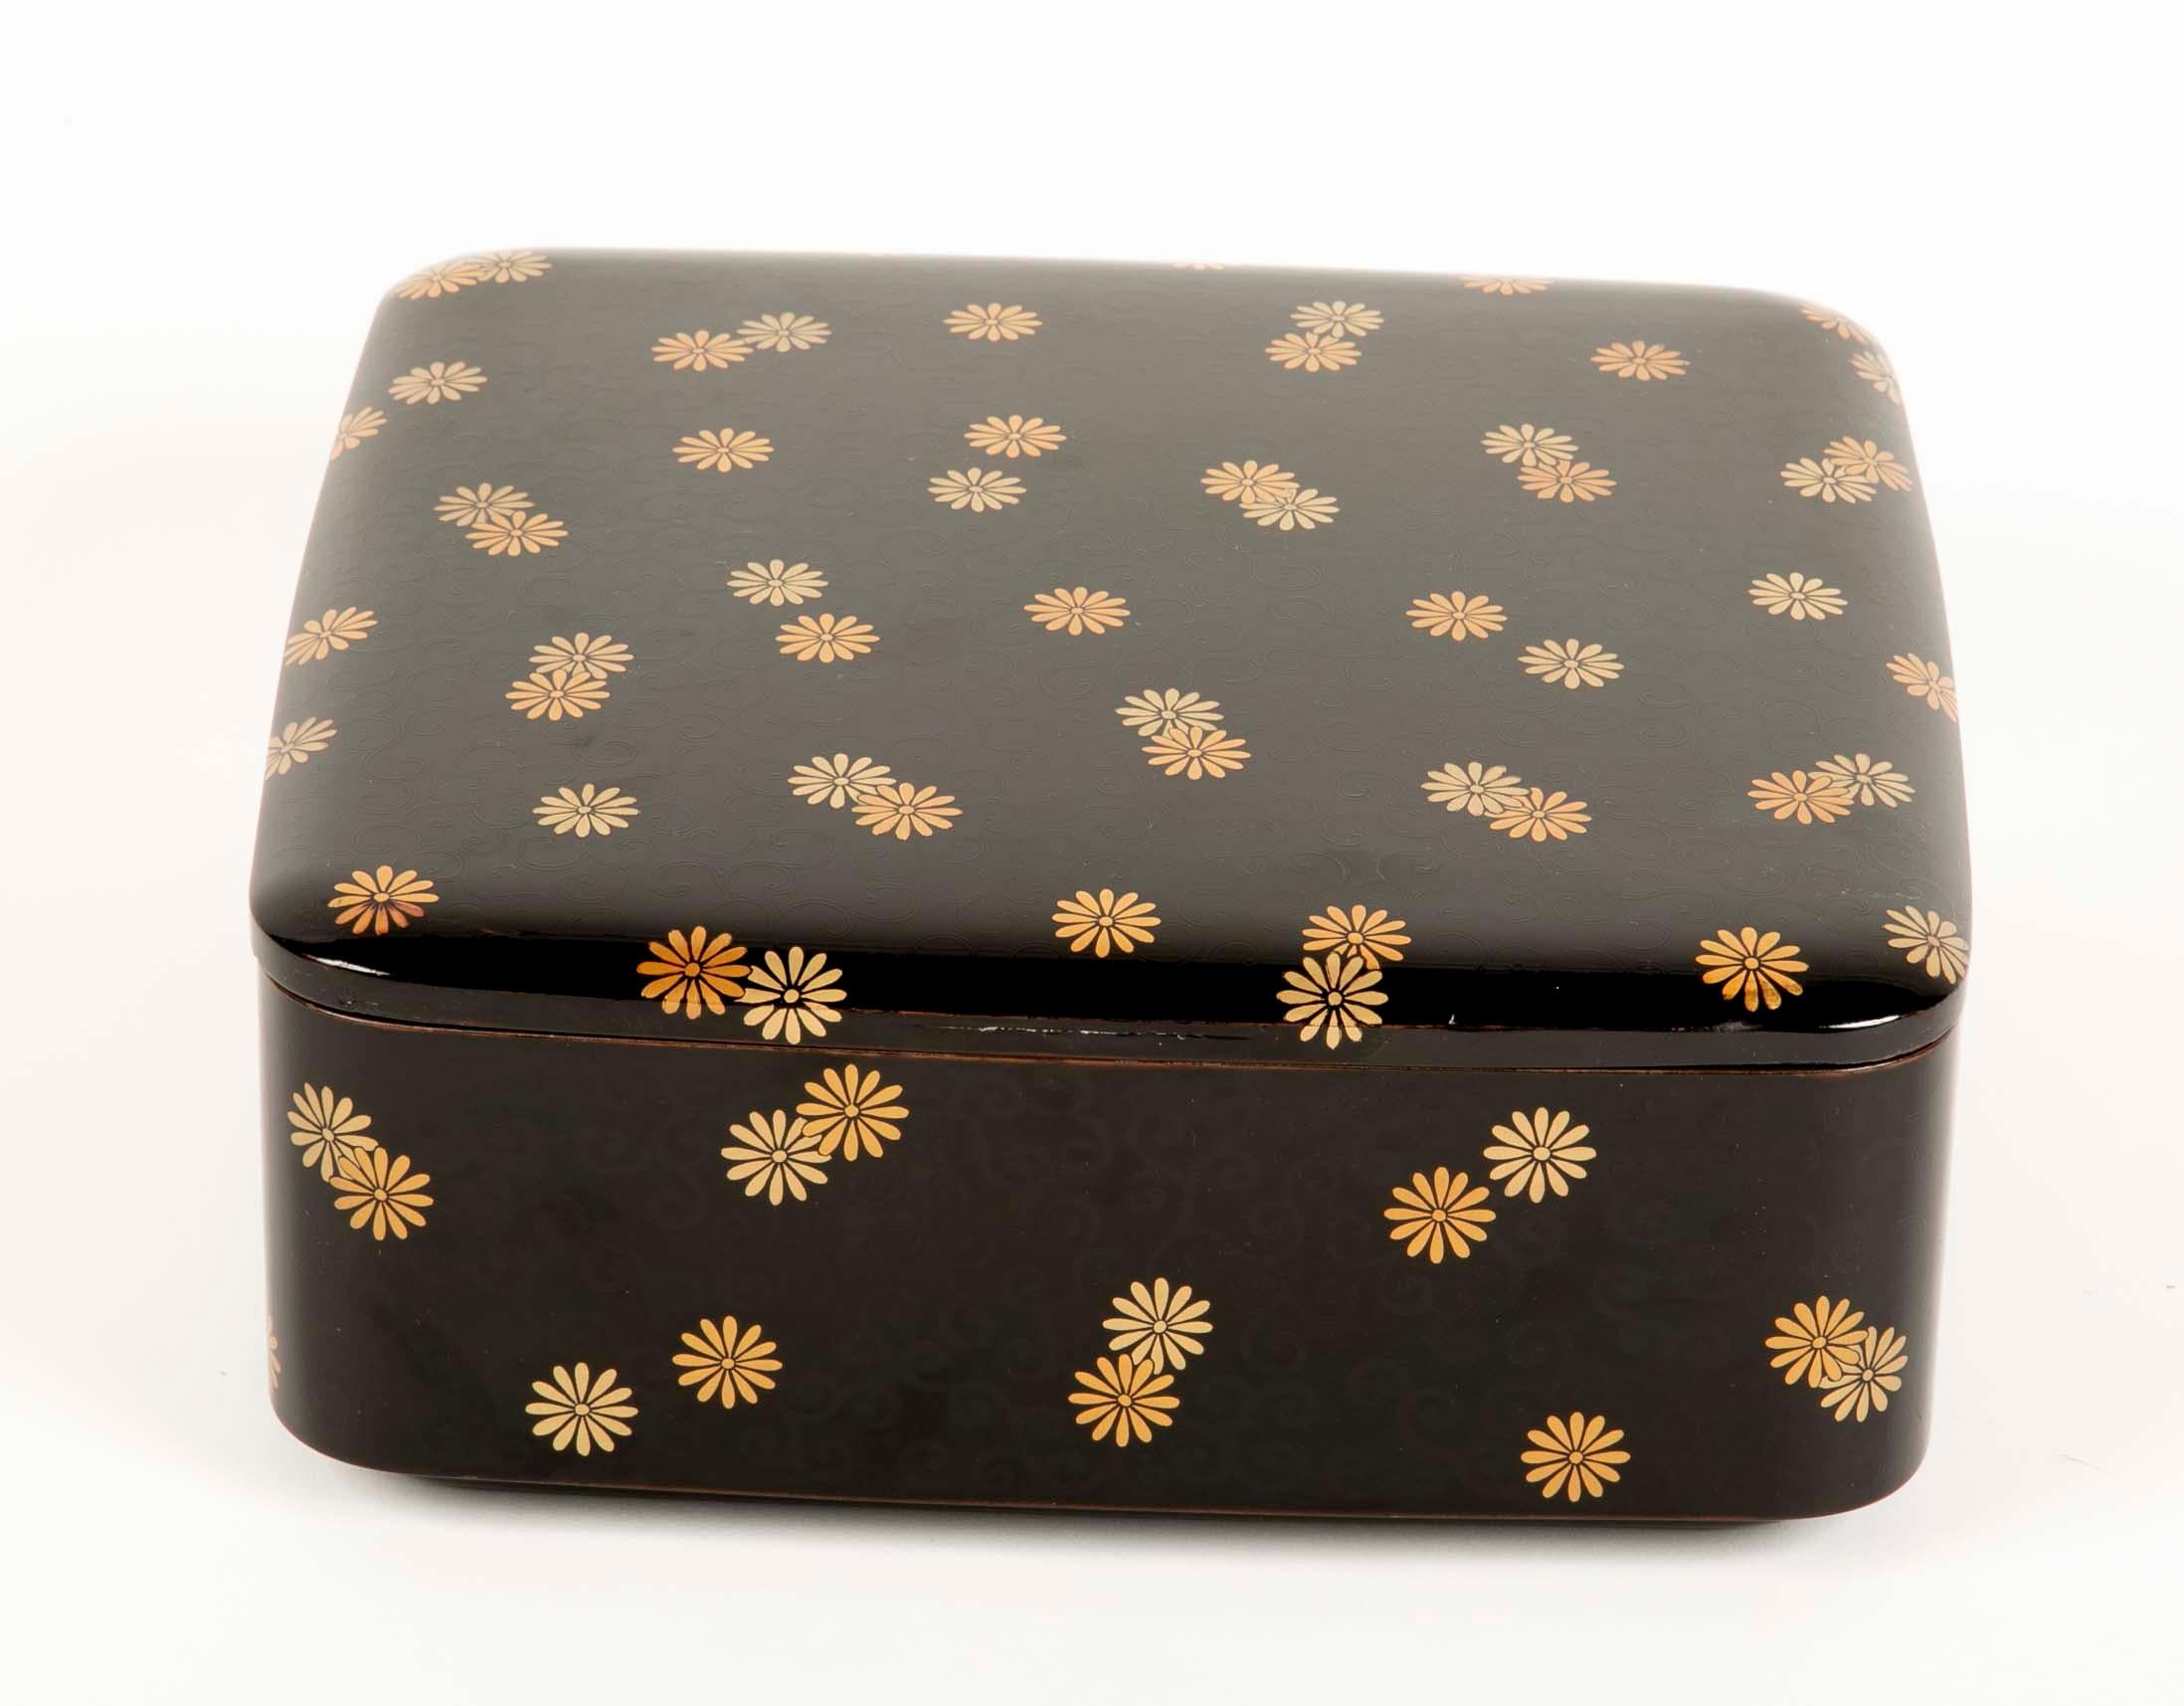 Japanese Ryoshibako ( document ) box of black lacquer with overall scattered gold chrysanthemum and engraved vine tendrils. Mid Meiji Period - 1890's.